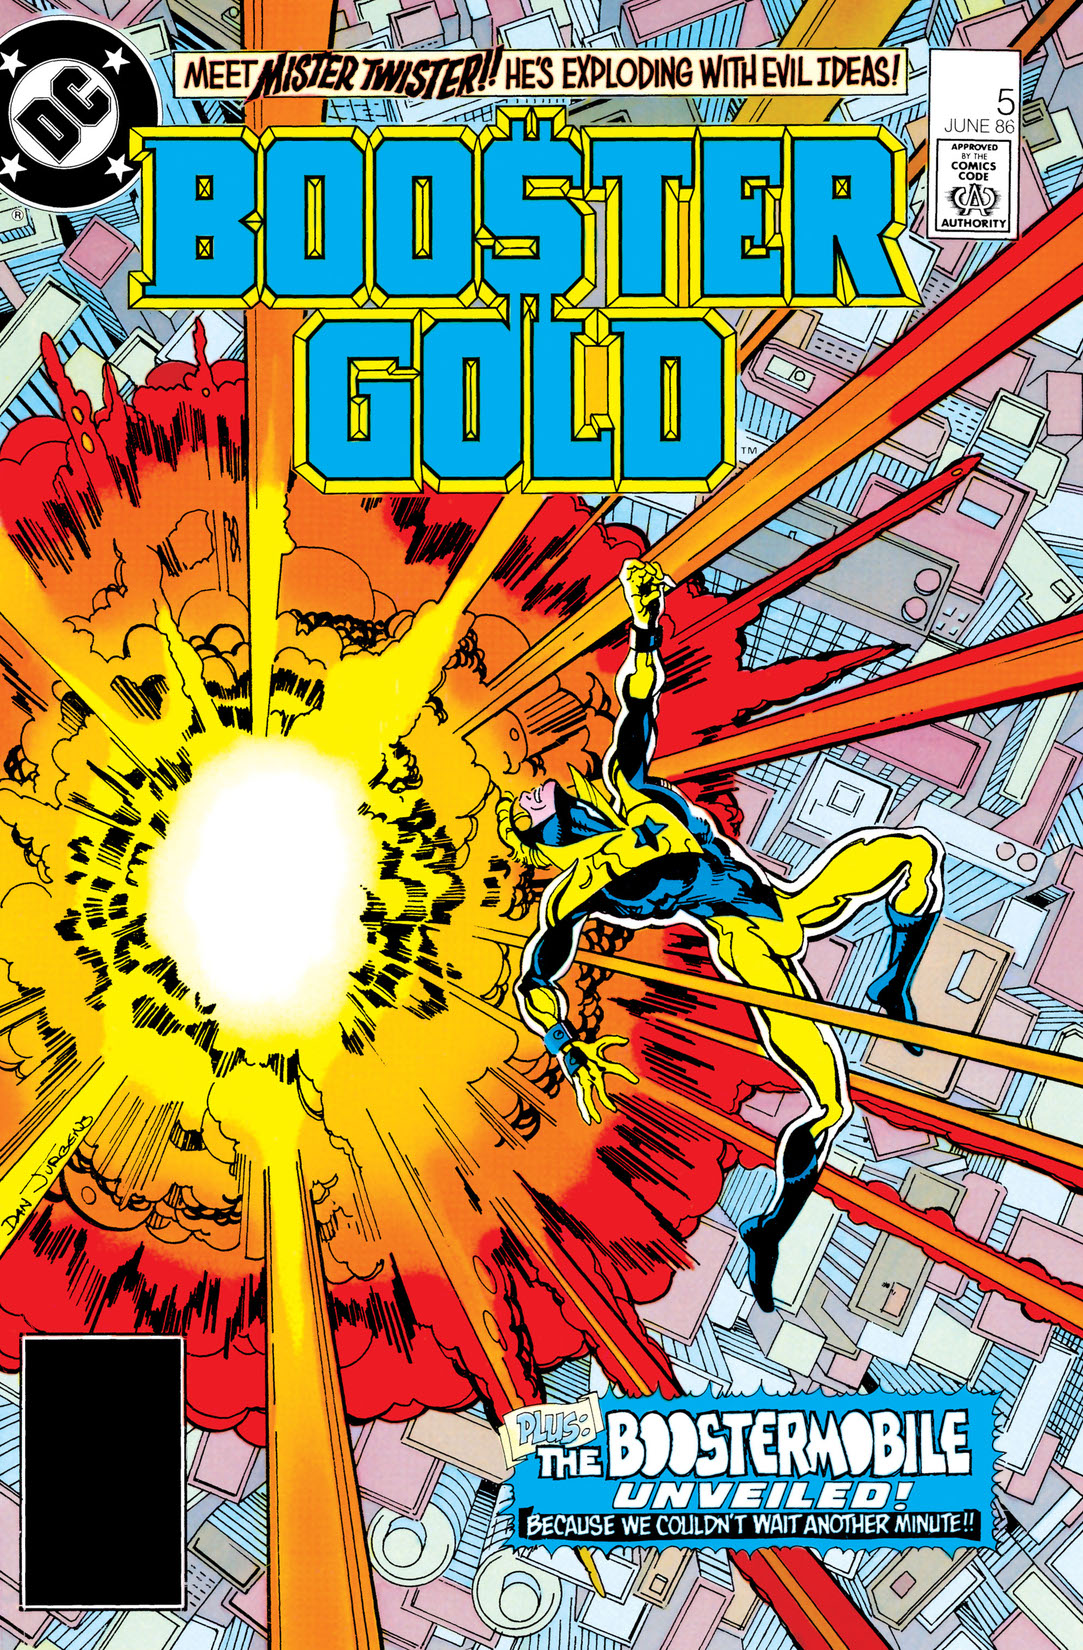 Booster Gold (1985-) #5 preview images